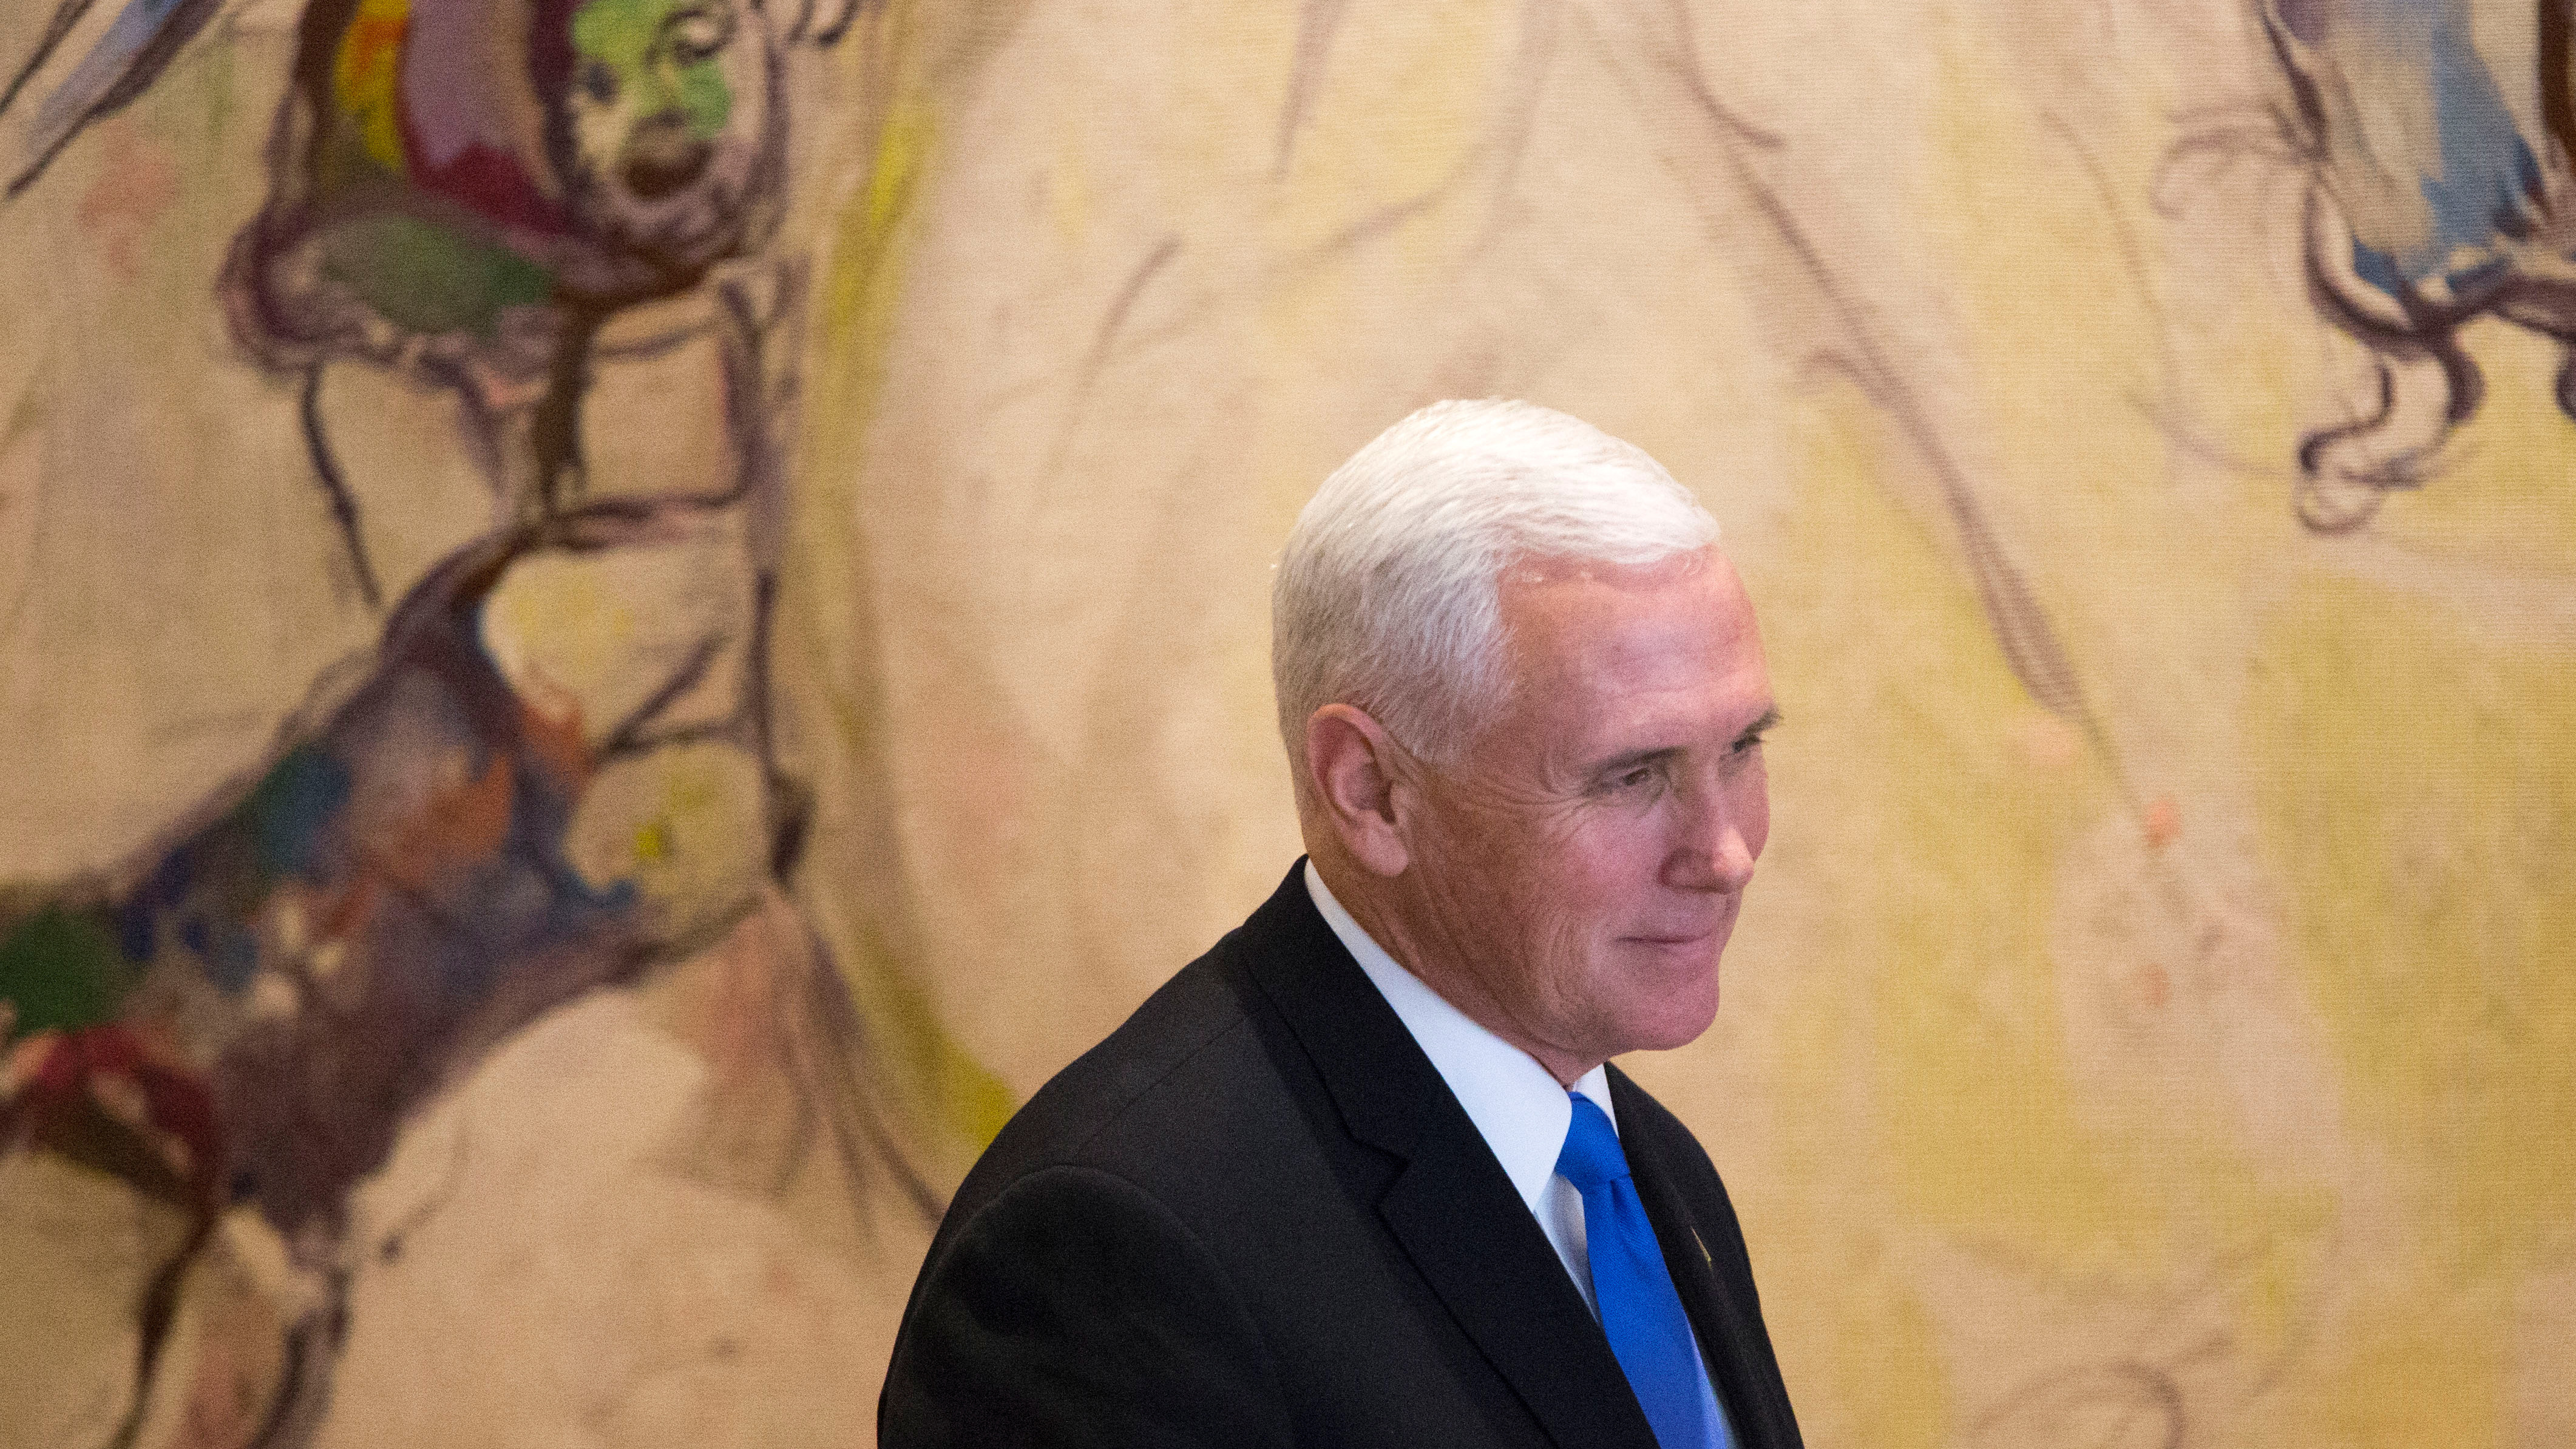 Vice President Mike Pence addressed the Knesset, Israel's parliament, in Jerusalem on Monday. He said a new U.S. embassy would open in the city by the end of next year.
